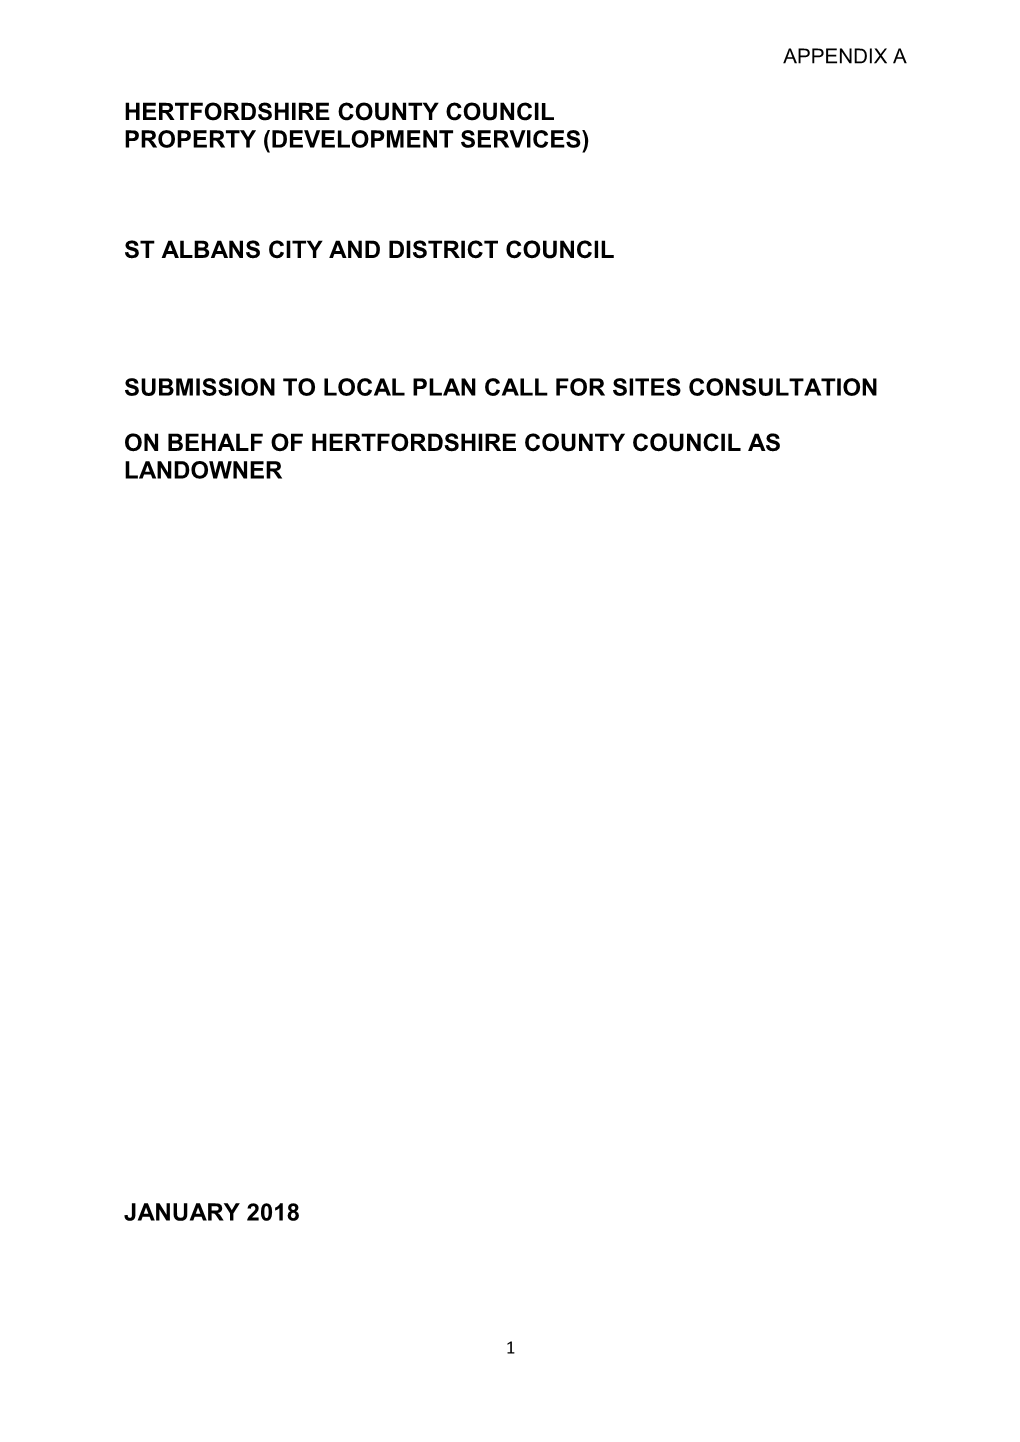 (Development Services) St Albans City and District Council Submission to Local Plan Call